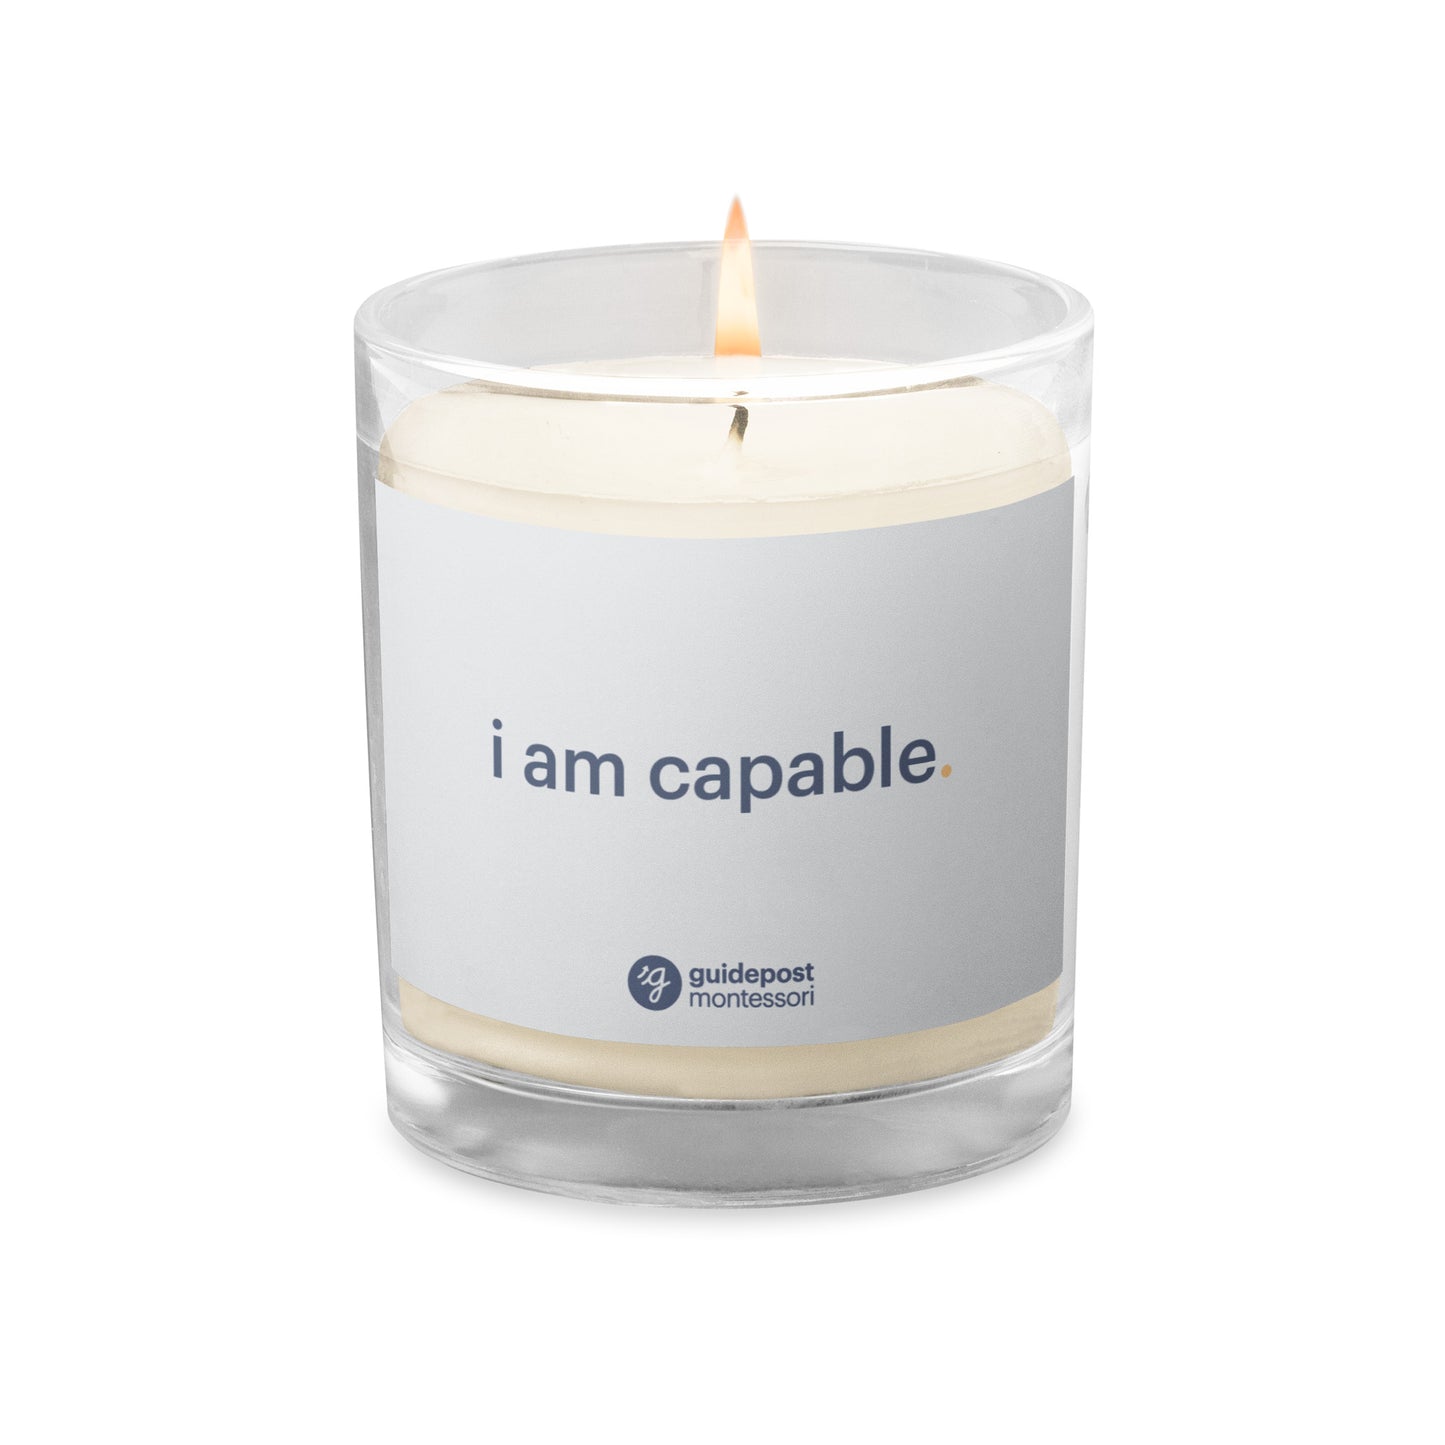 I am capable glass jar soy wax candle